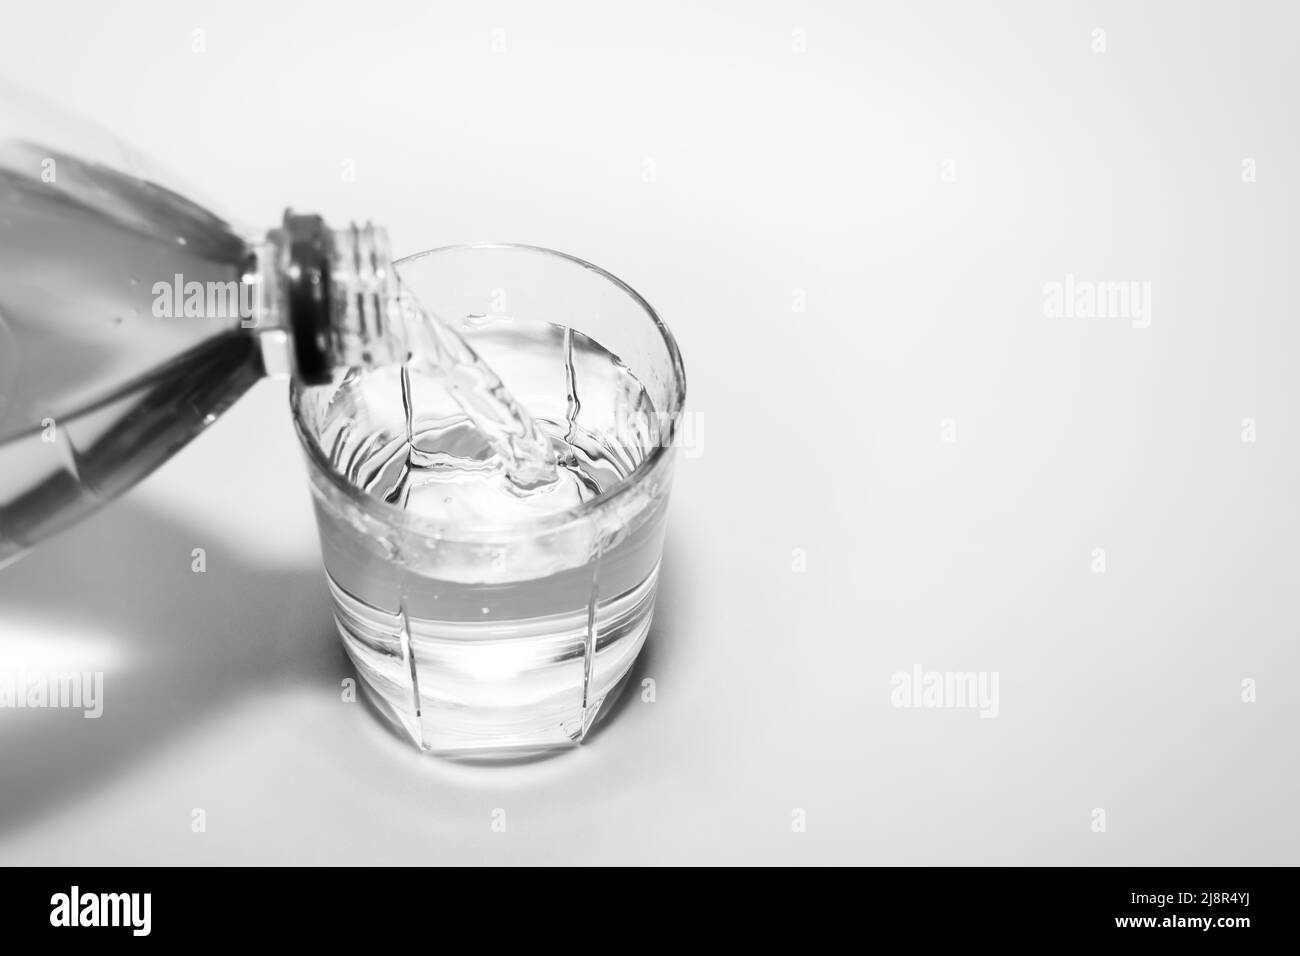 Pouring drinking water into a glass cup from a plastic bottle close-up. Black and white photo. Stock Photo